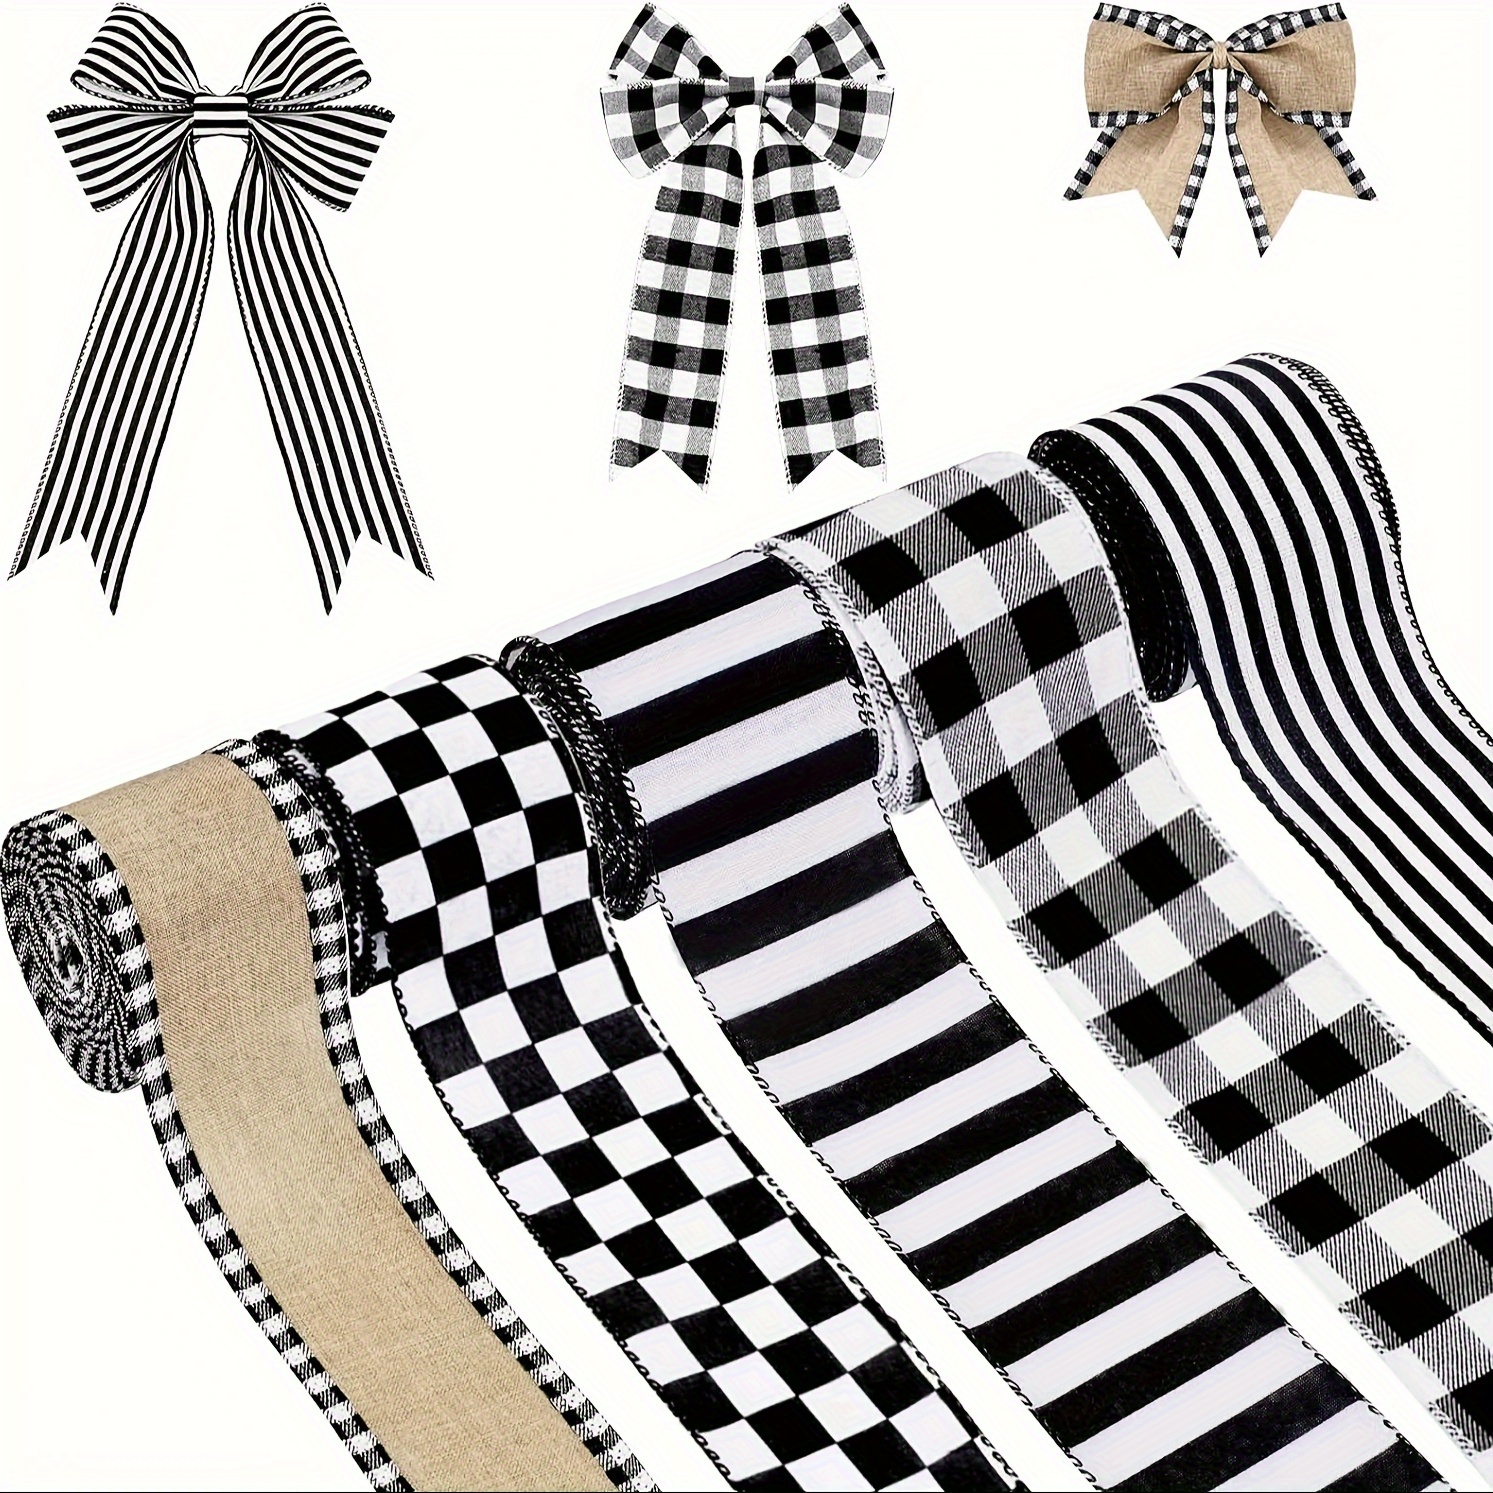 1 Inch Plaid Satin Ribbons Black and White Diamond Check Ribbon, 5 Yards  for DIY Craft Wrapping Bow Home Party Decor